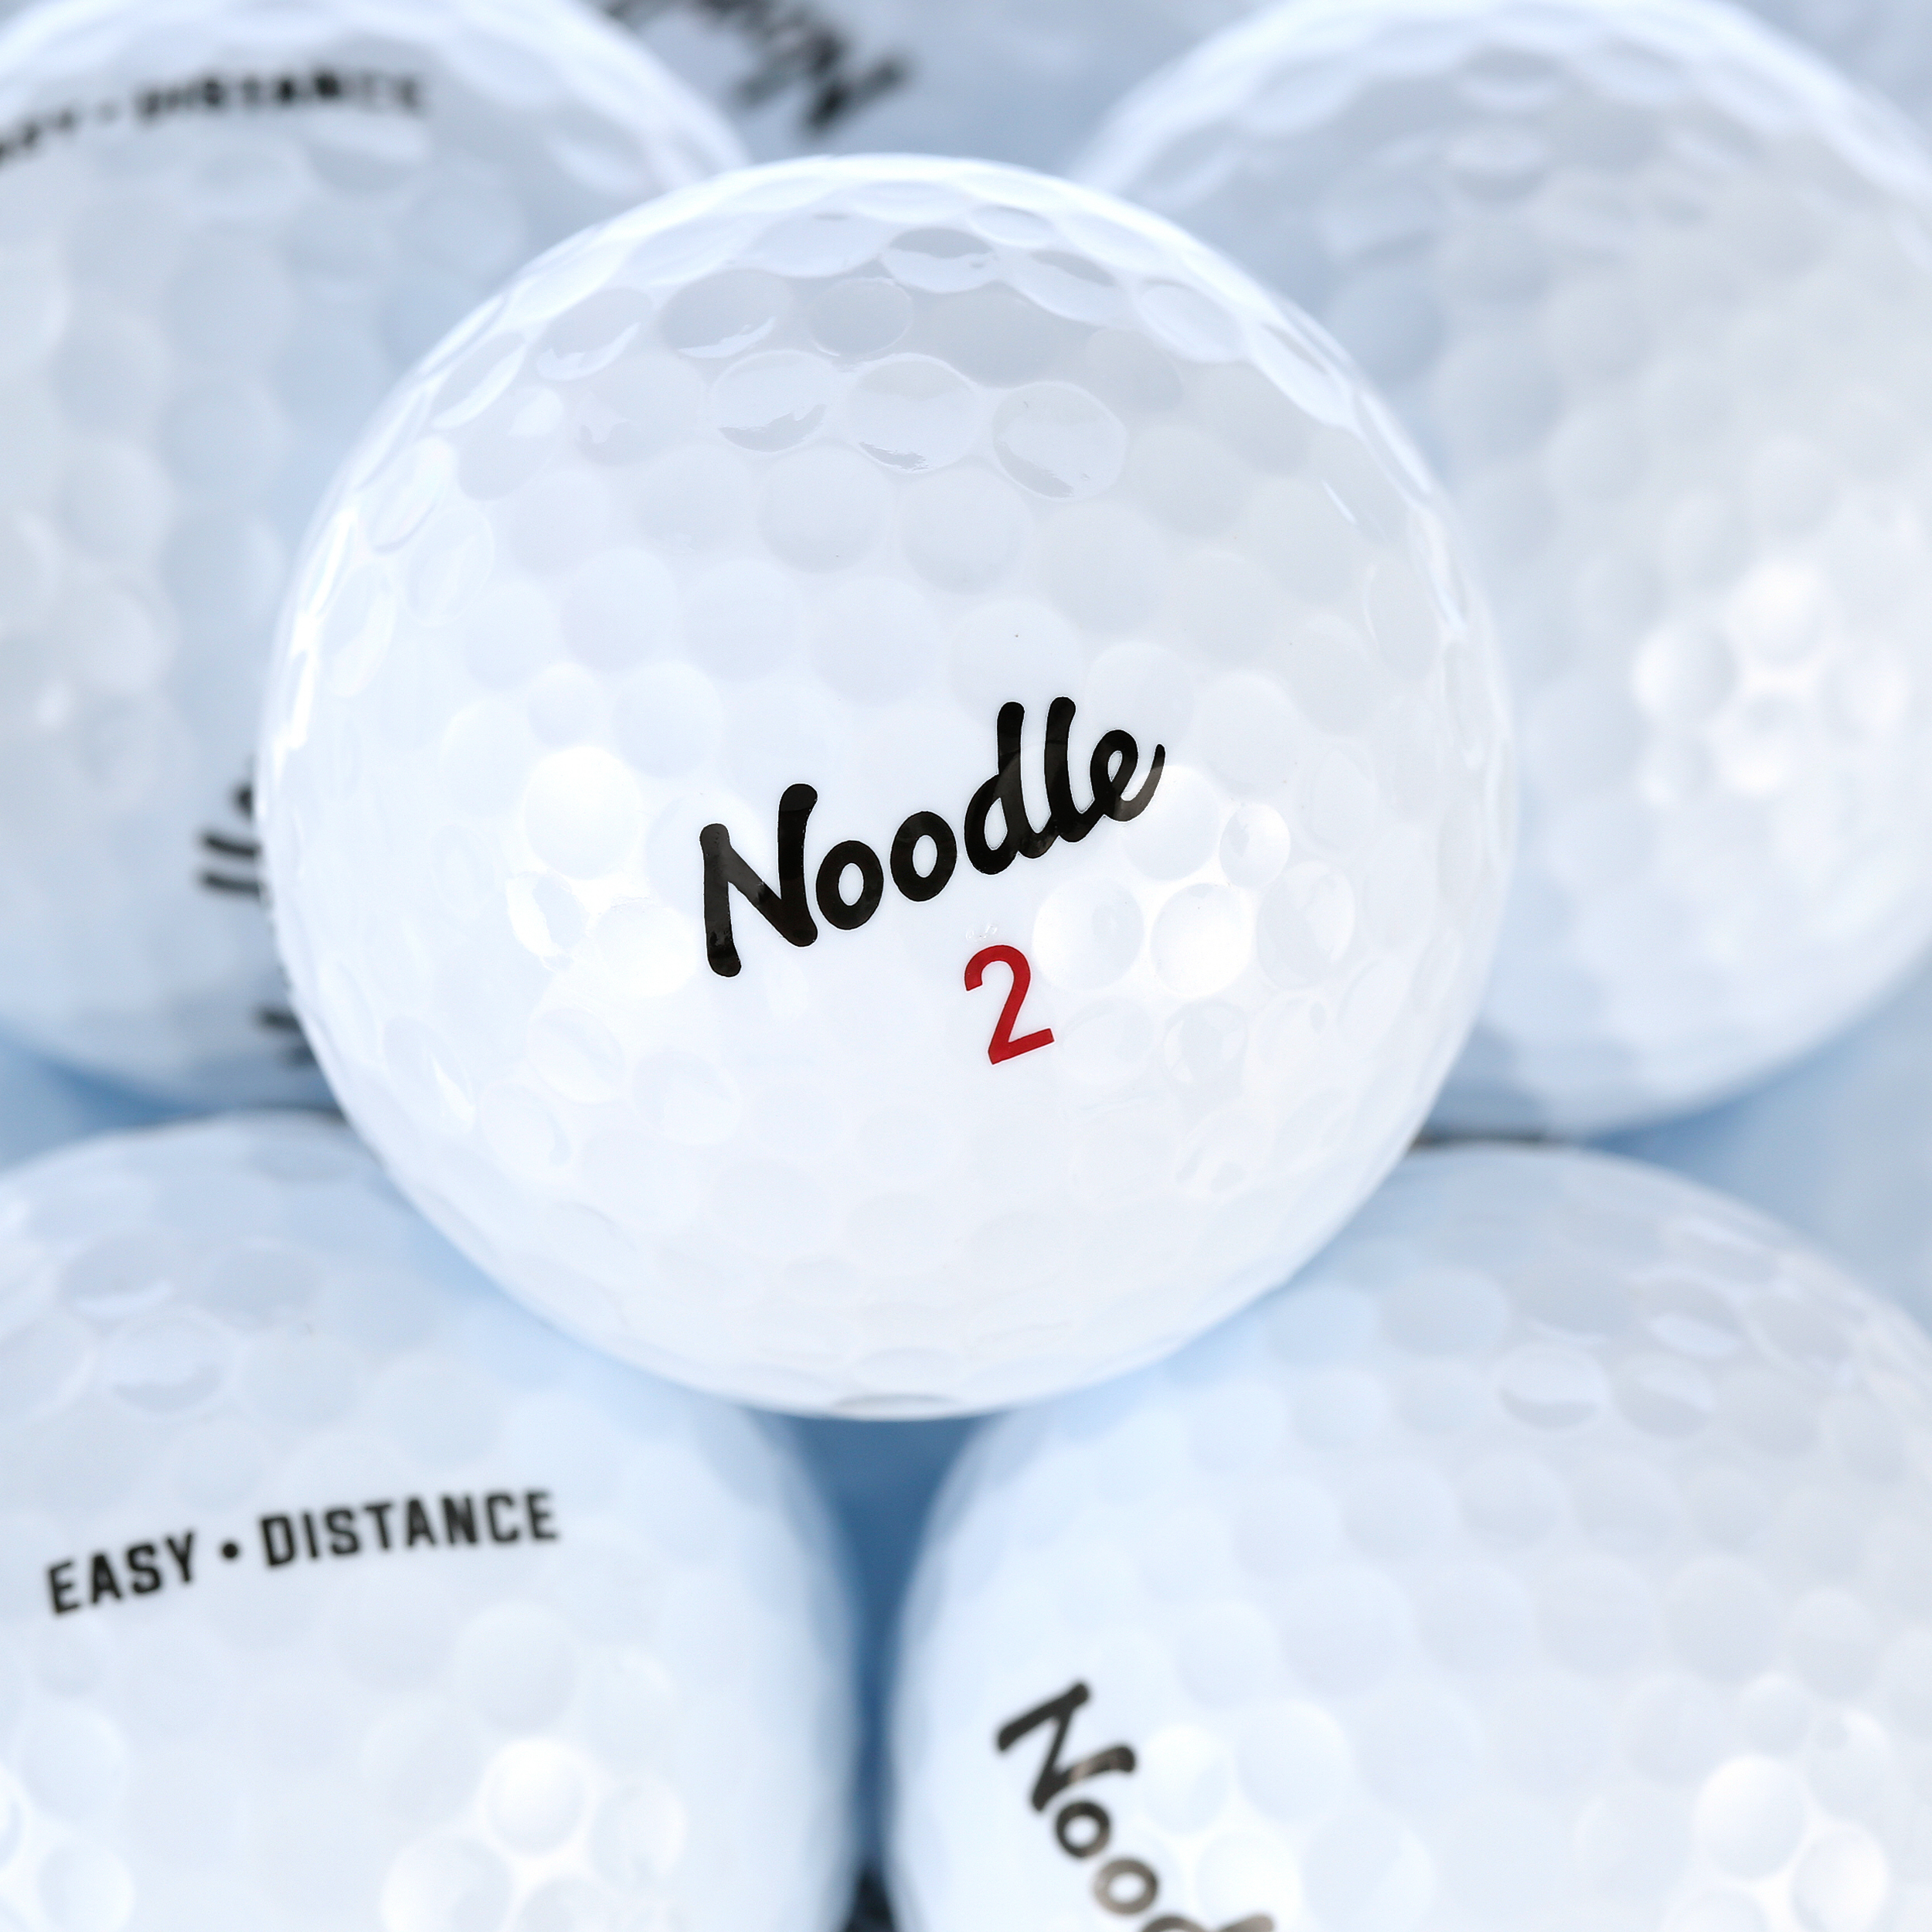 TaylorMade Noodle Easy Distance Golf Balls, 30 Pack - image 5 of 5